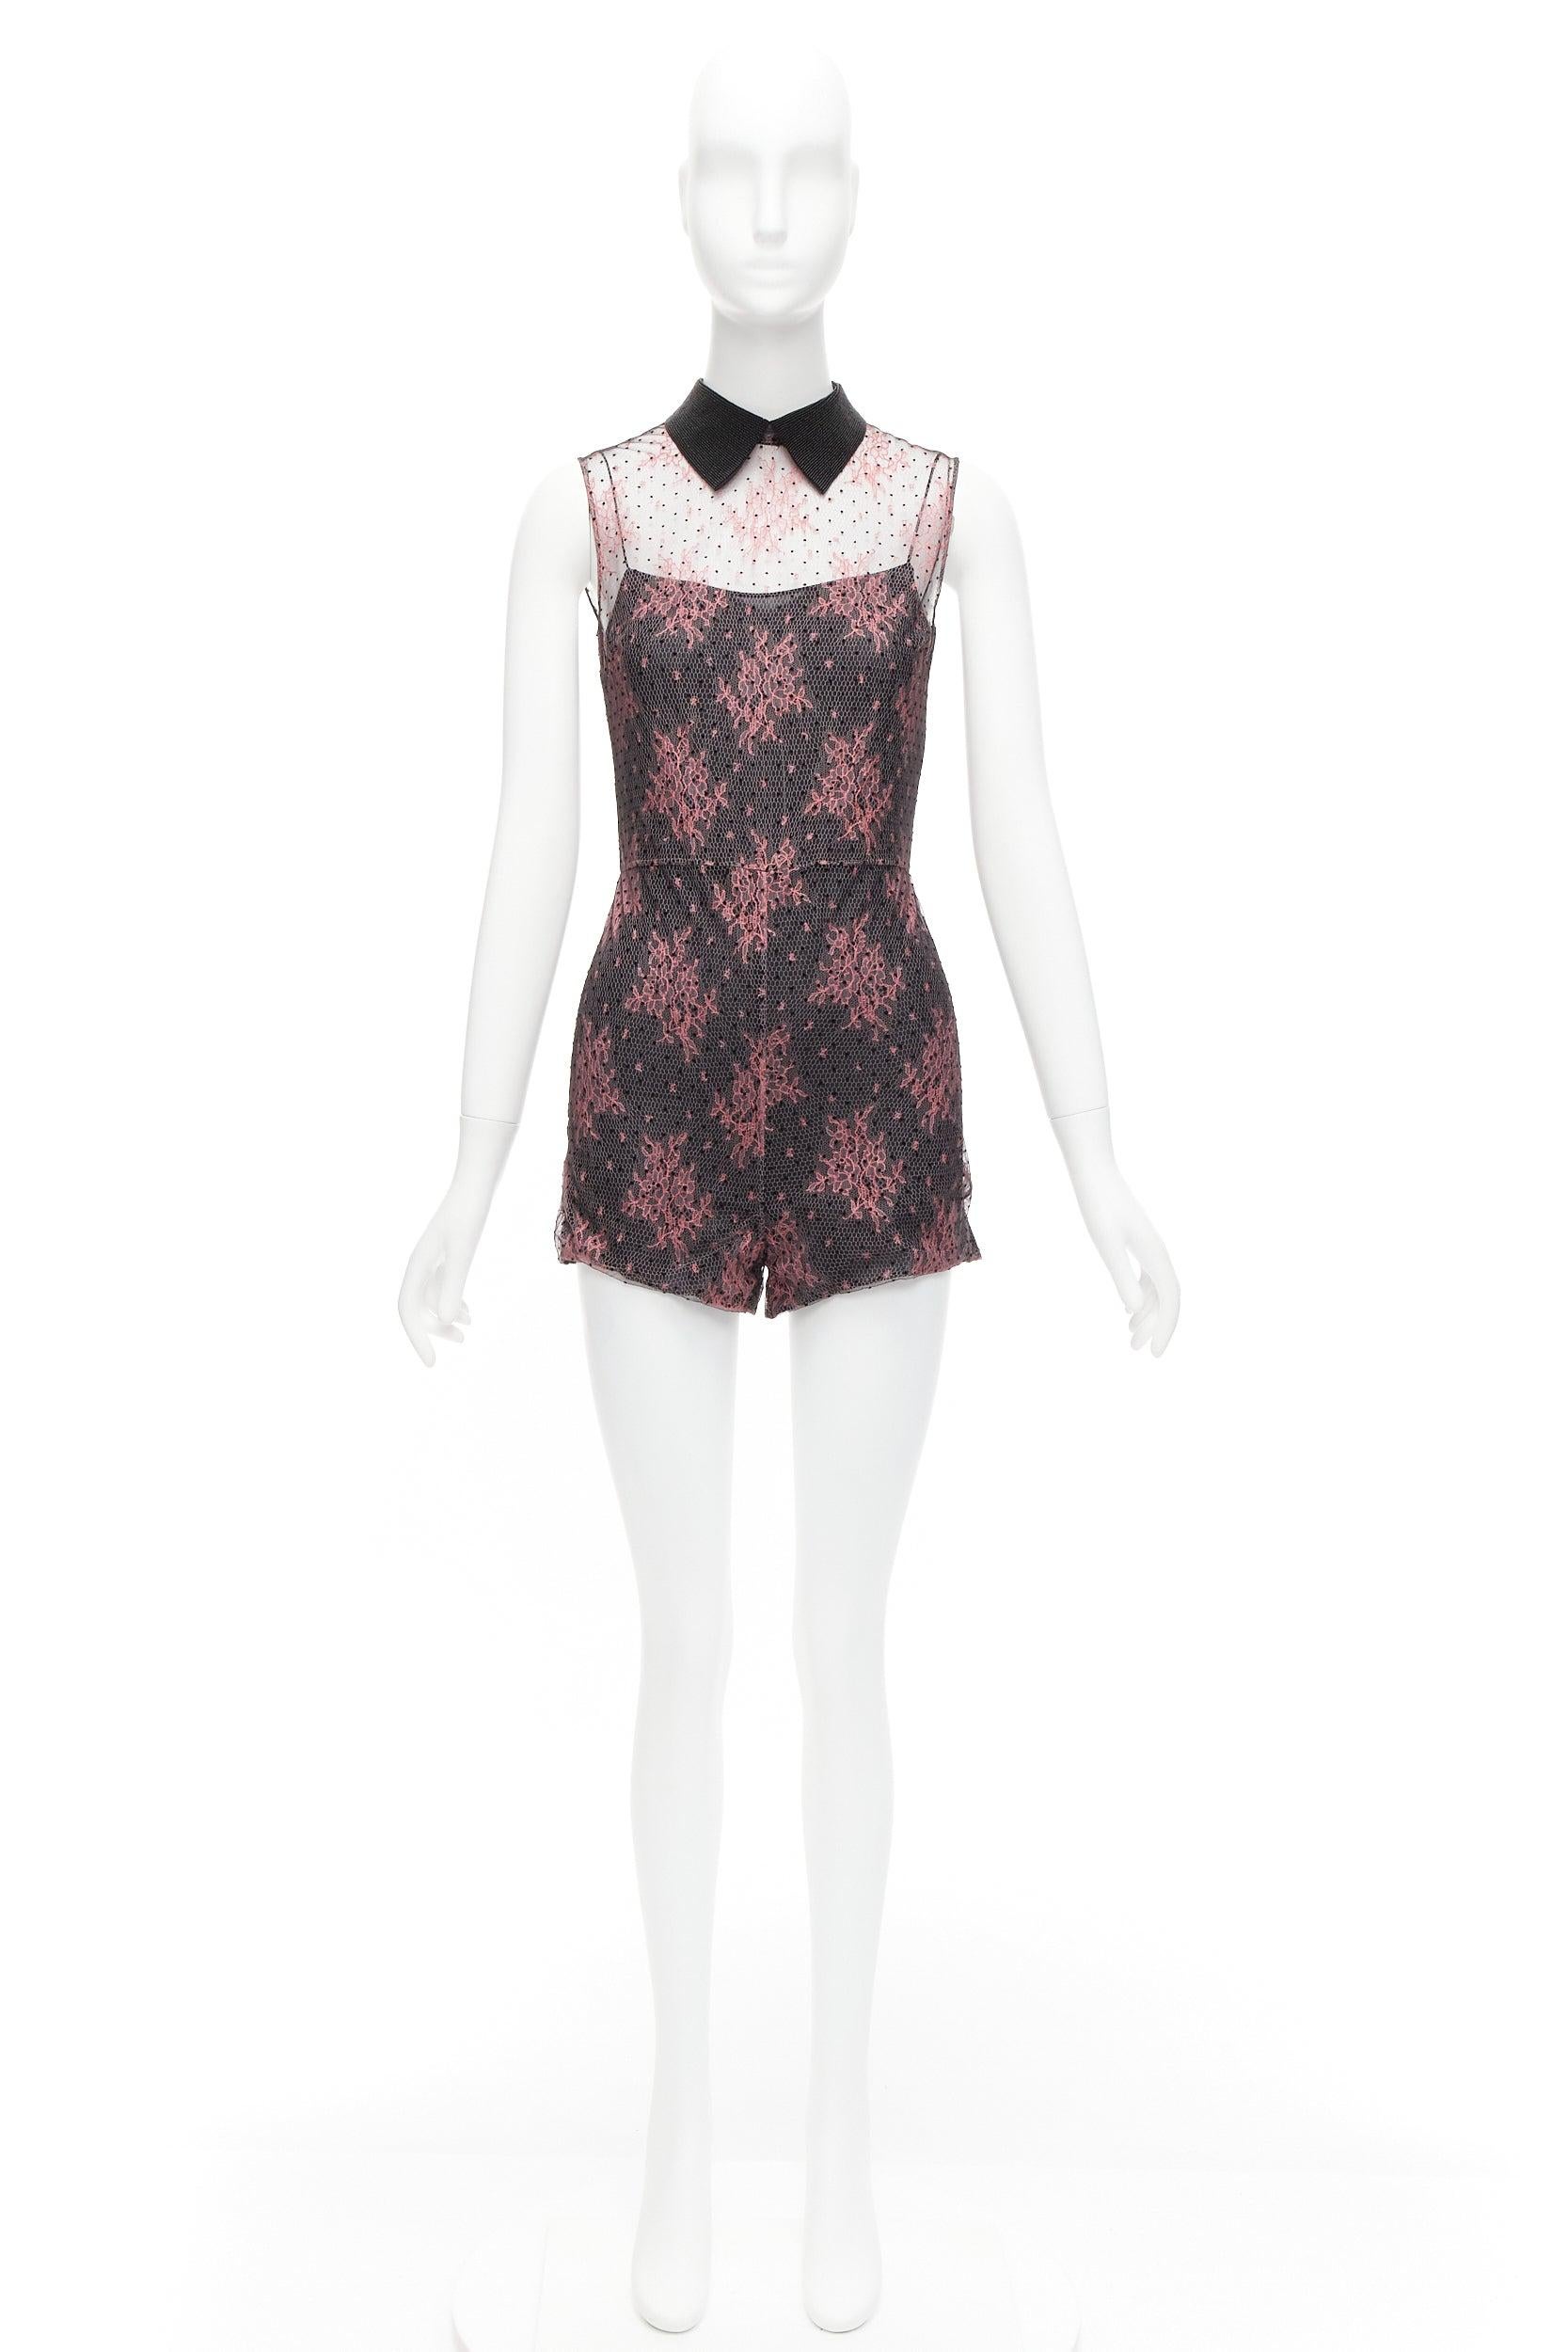 CHRISTIAN DIOR  black pink intricate lace overlay playsuit romper FR34 XS For Sale 5